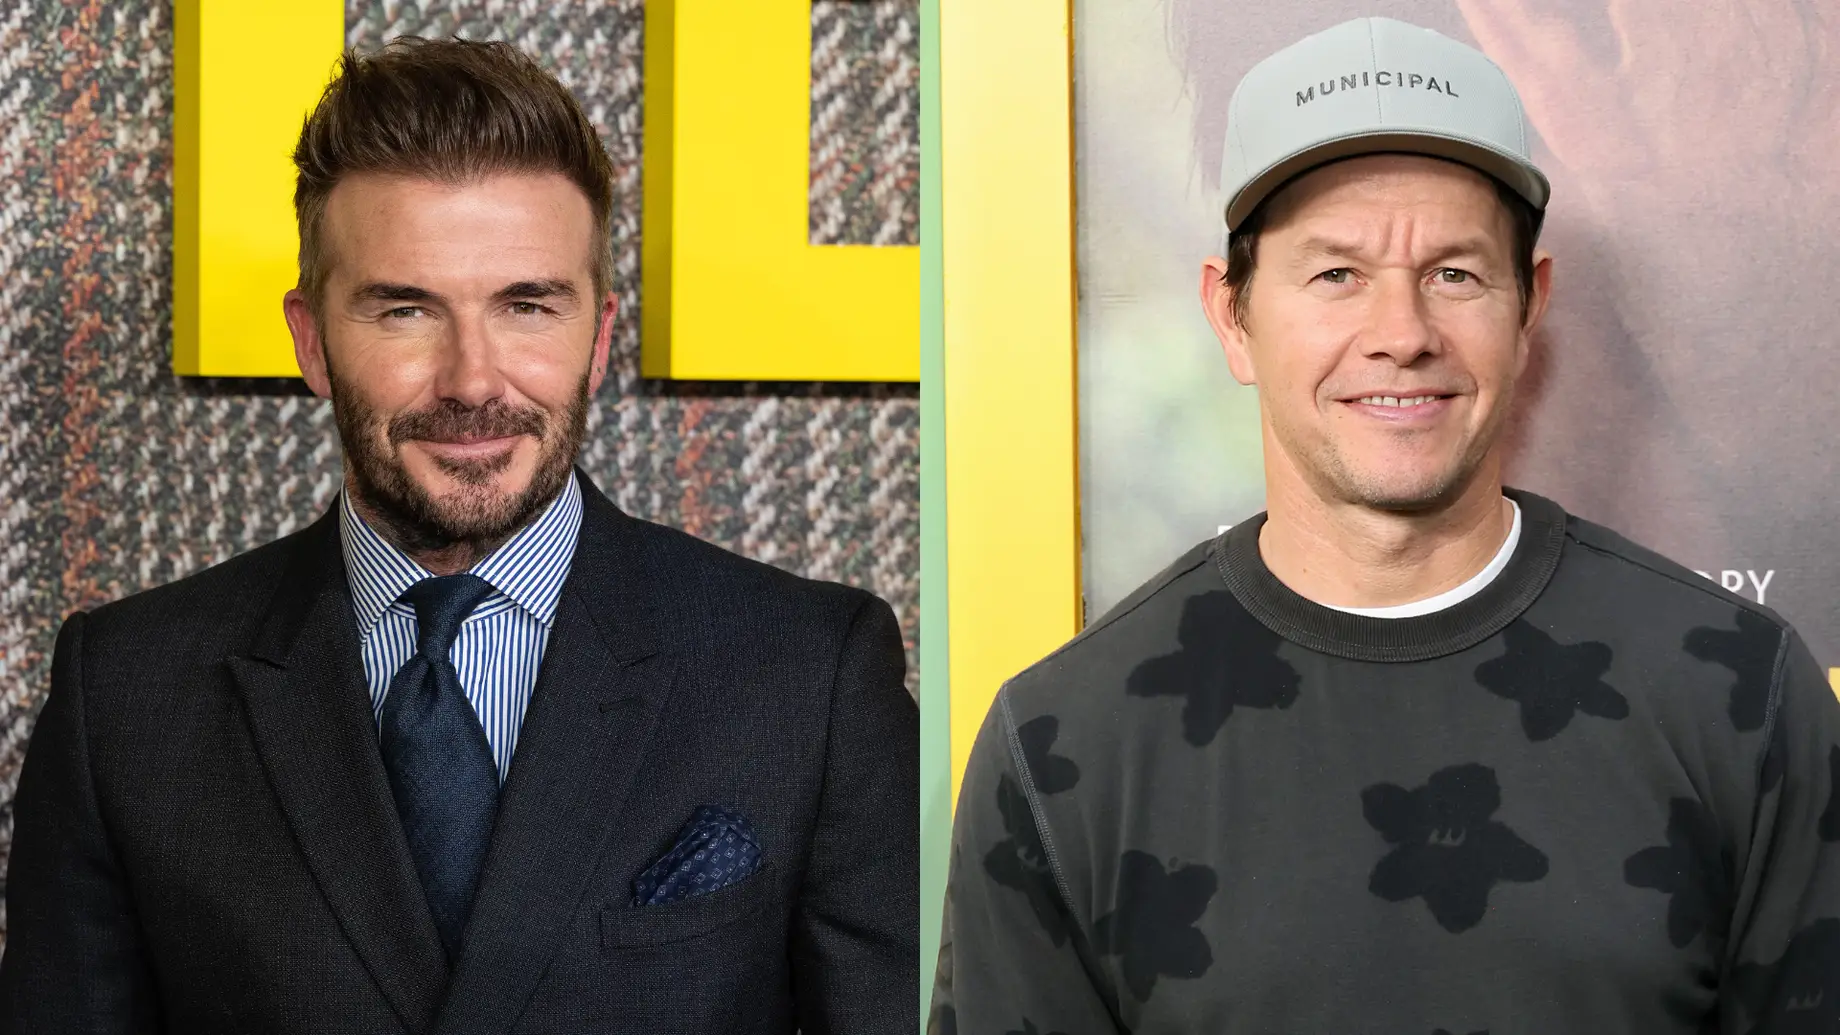 David Beckham Files Lawsuit Against Mark Wahlberg Over Failed $10 Million Fitness Company Investment